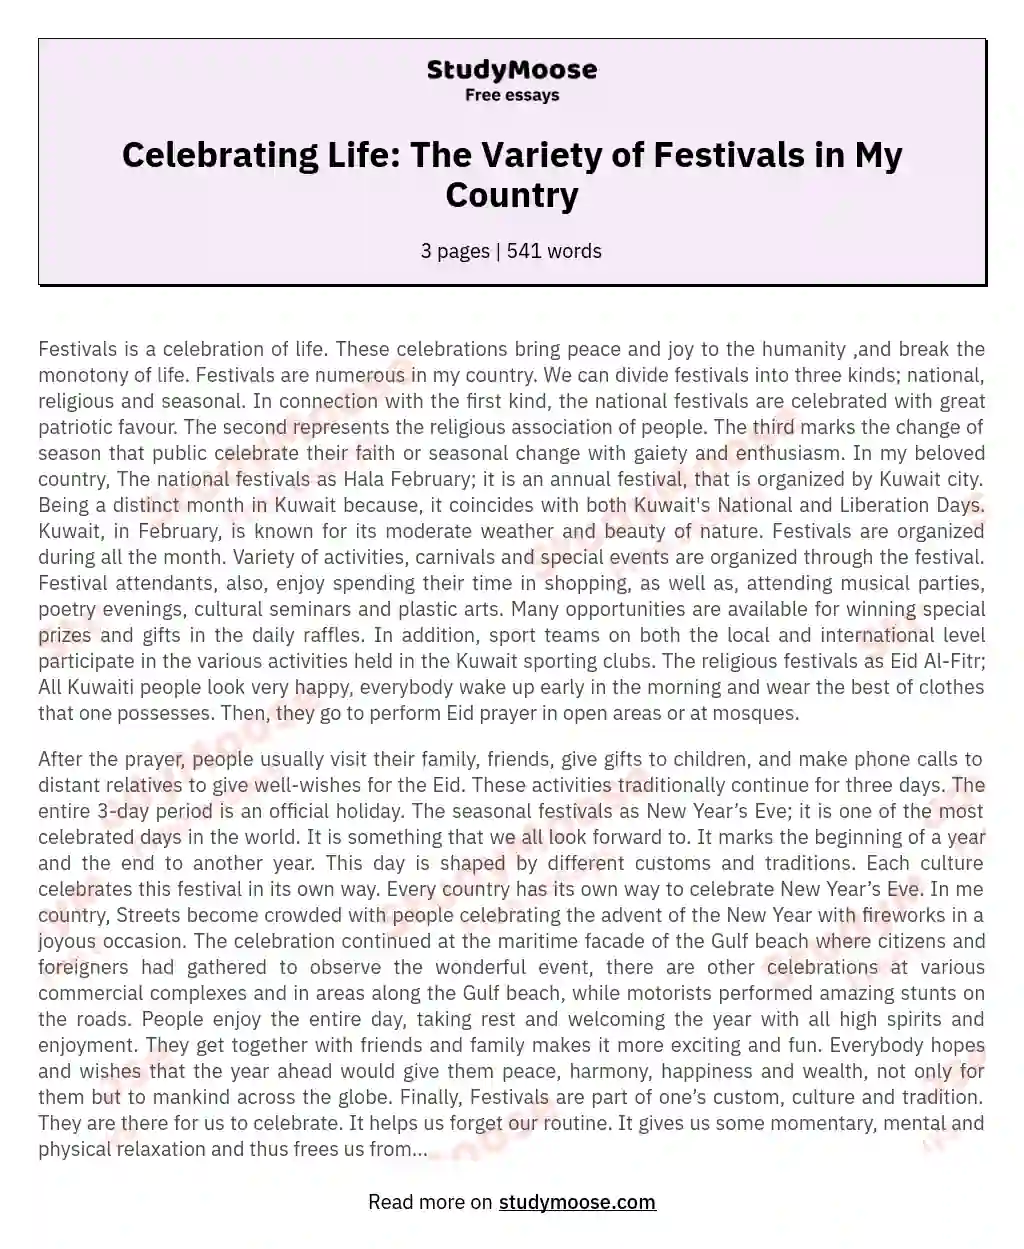 Celebrating Life: The Variety of Festivals in My Country essay